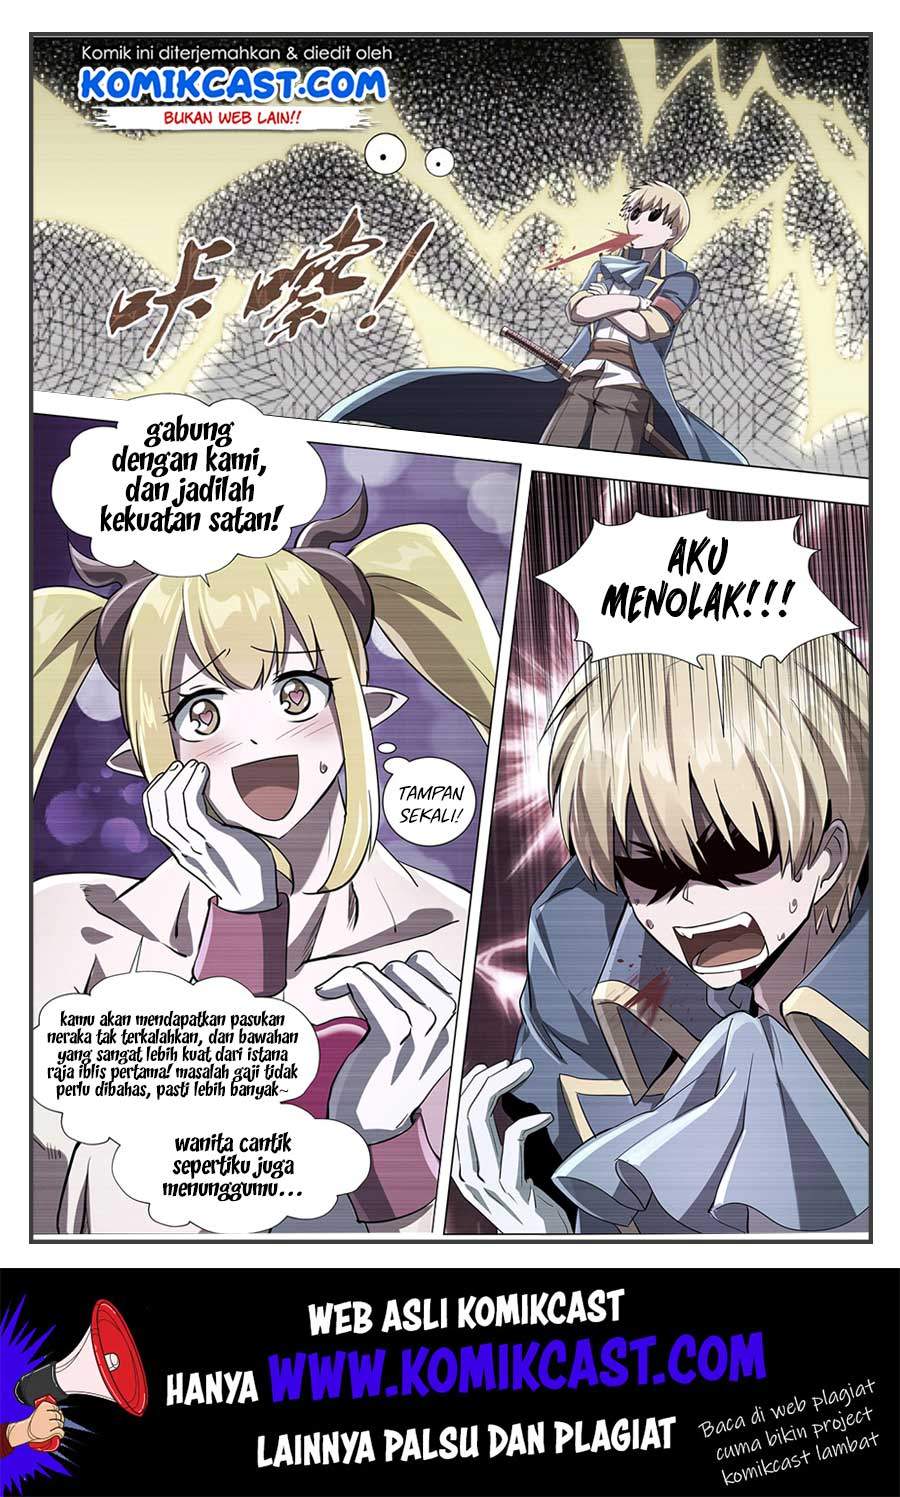 The Demon King Who Lost His Job Chapter 70 Bahasa Indonesia